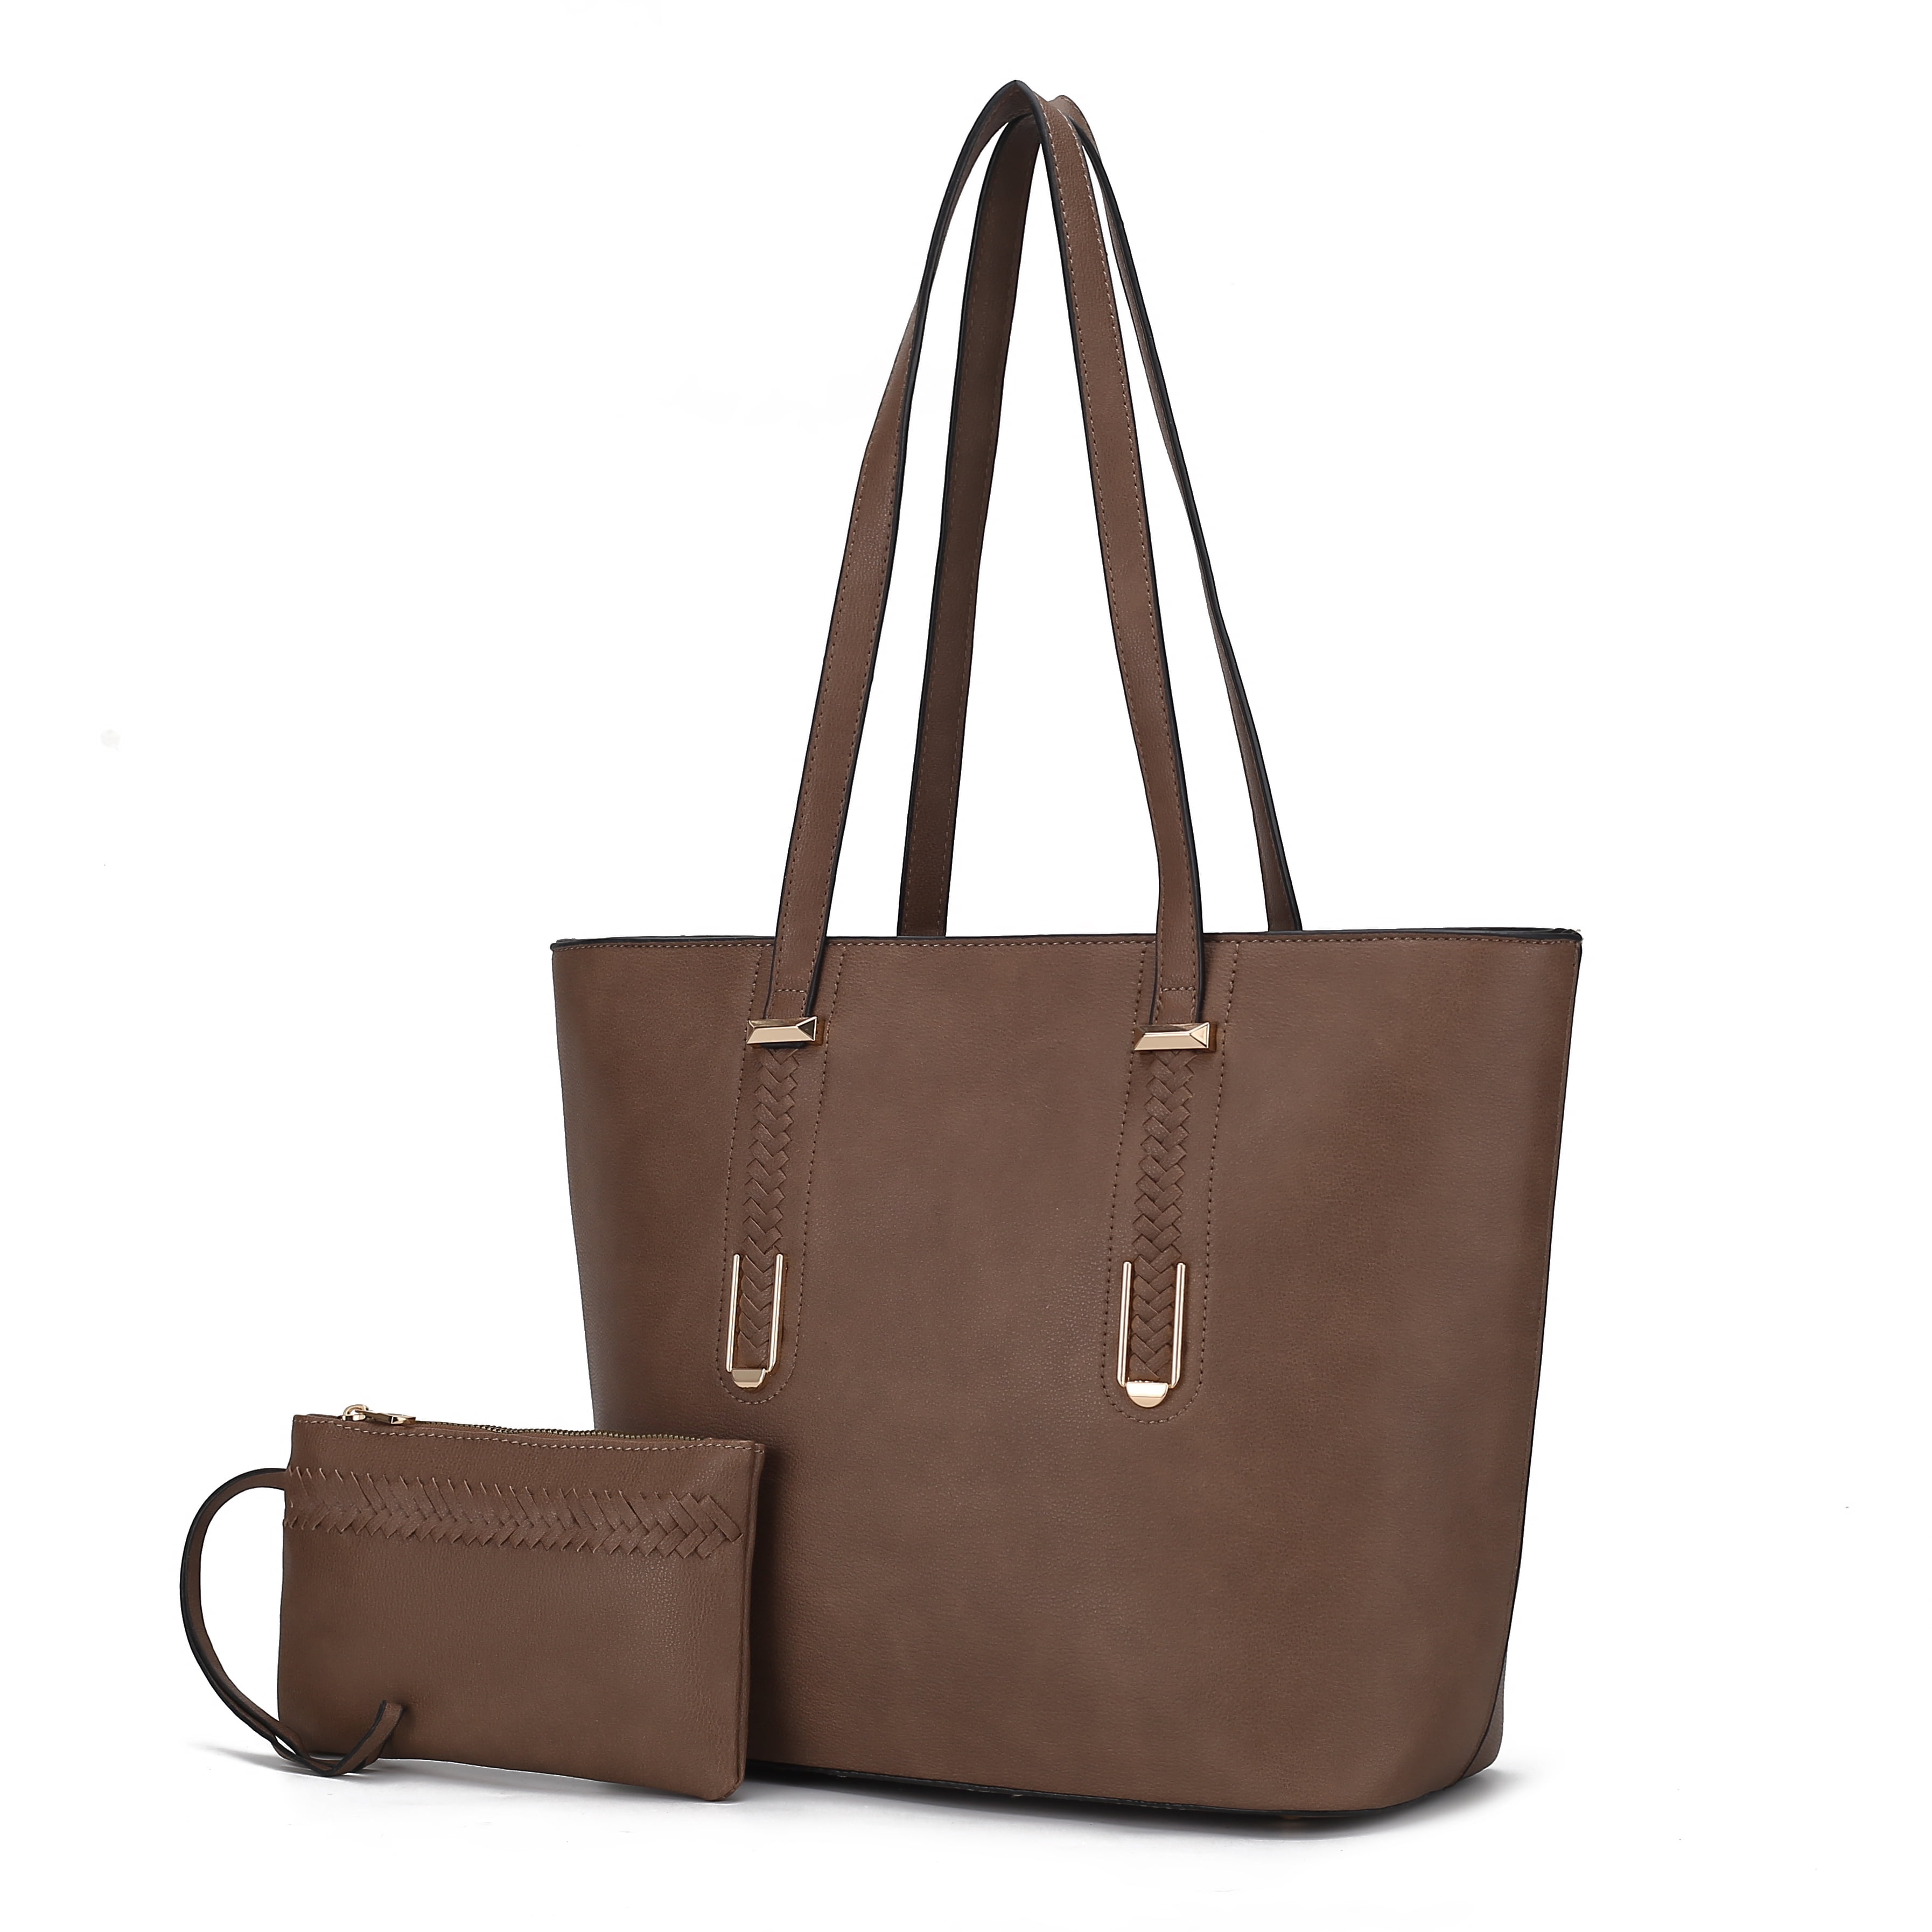 Latest Women's Bag Tote Bag BN 2 In 1 Free Pouch Premium Material